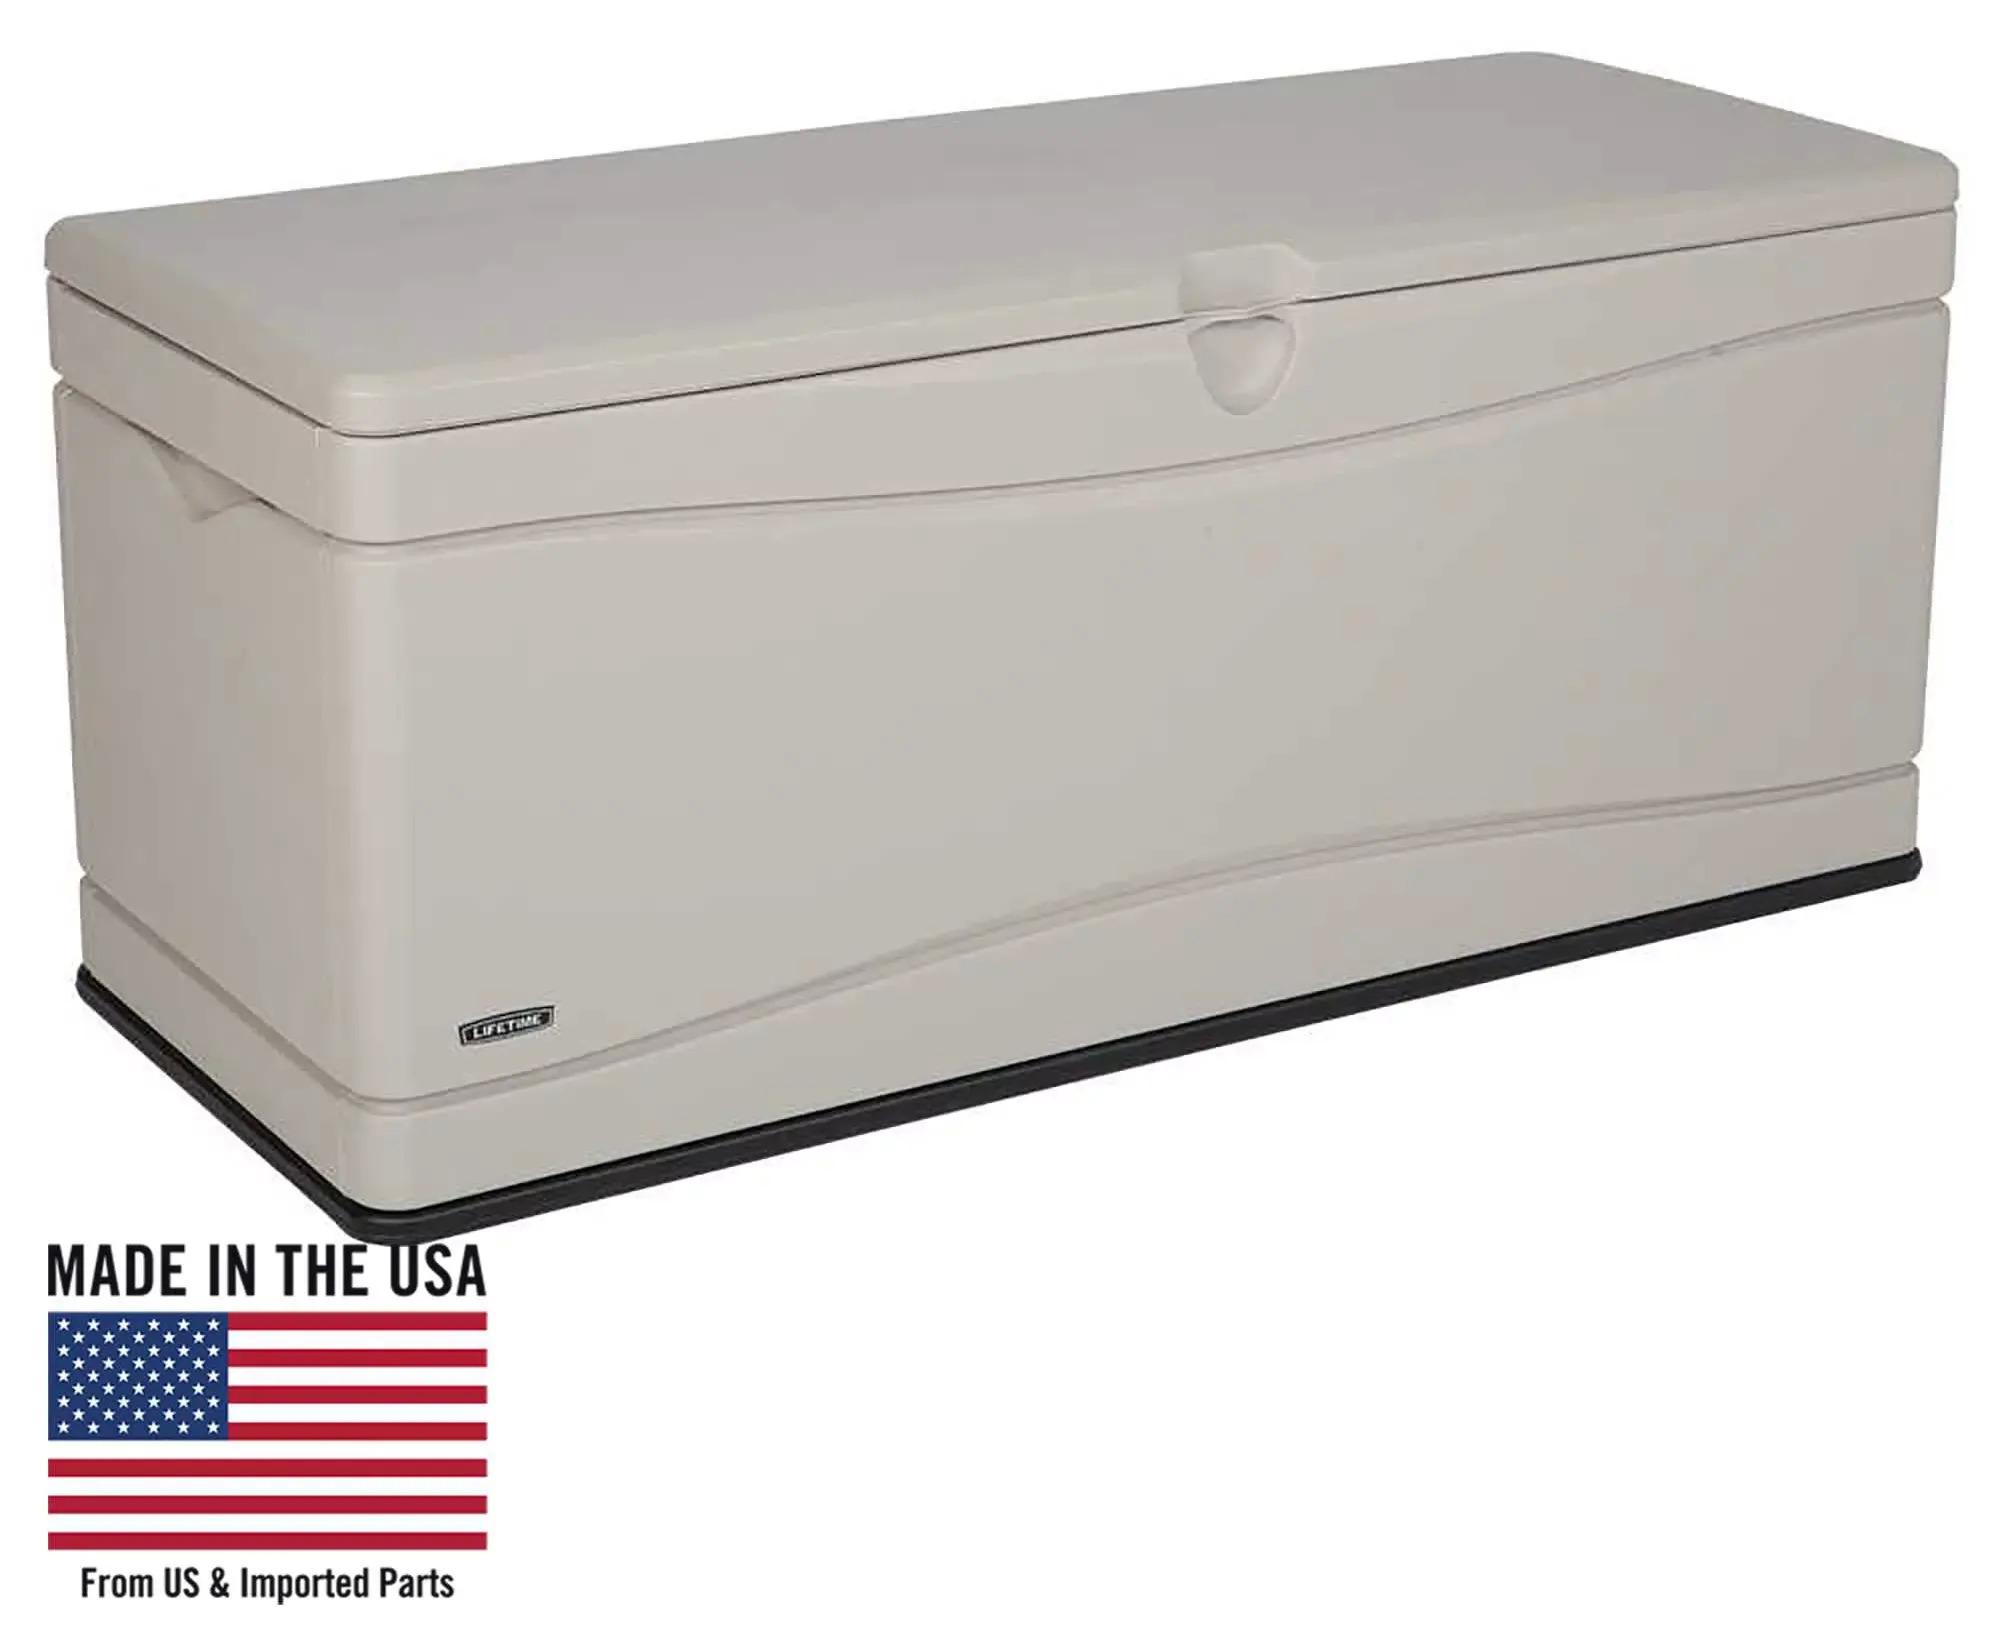 Lifetime 130-Gallon Outdoor Storage Box for $97 Shipped